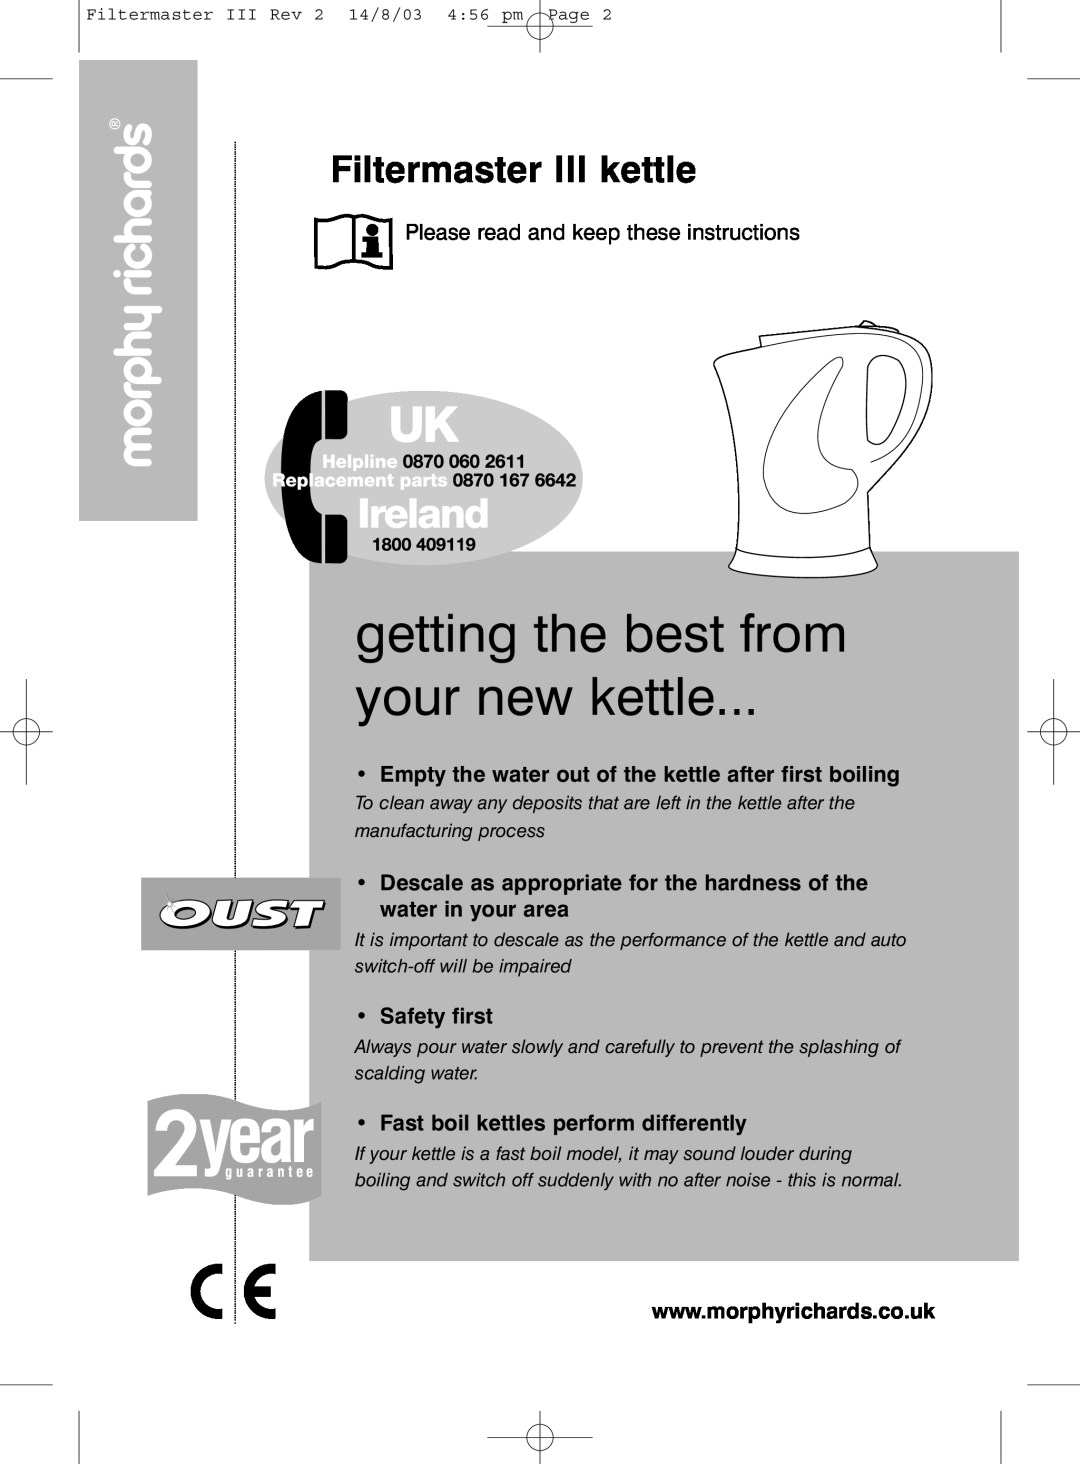 Morphy Richards manual getting the best from your new kettle, Filtermaster III kettle, Safety first 